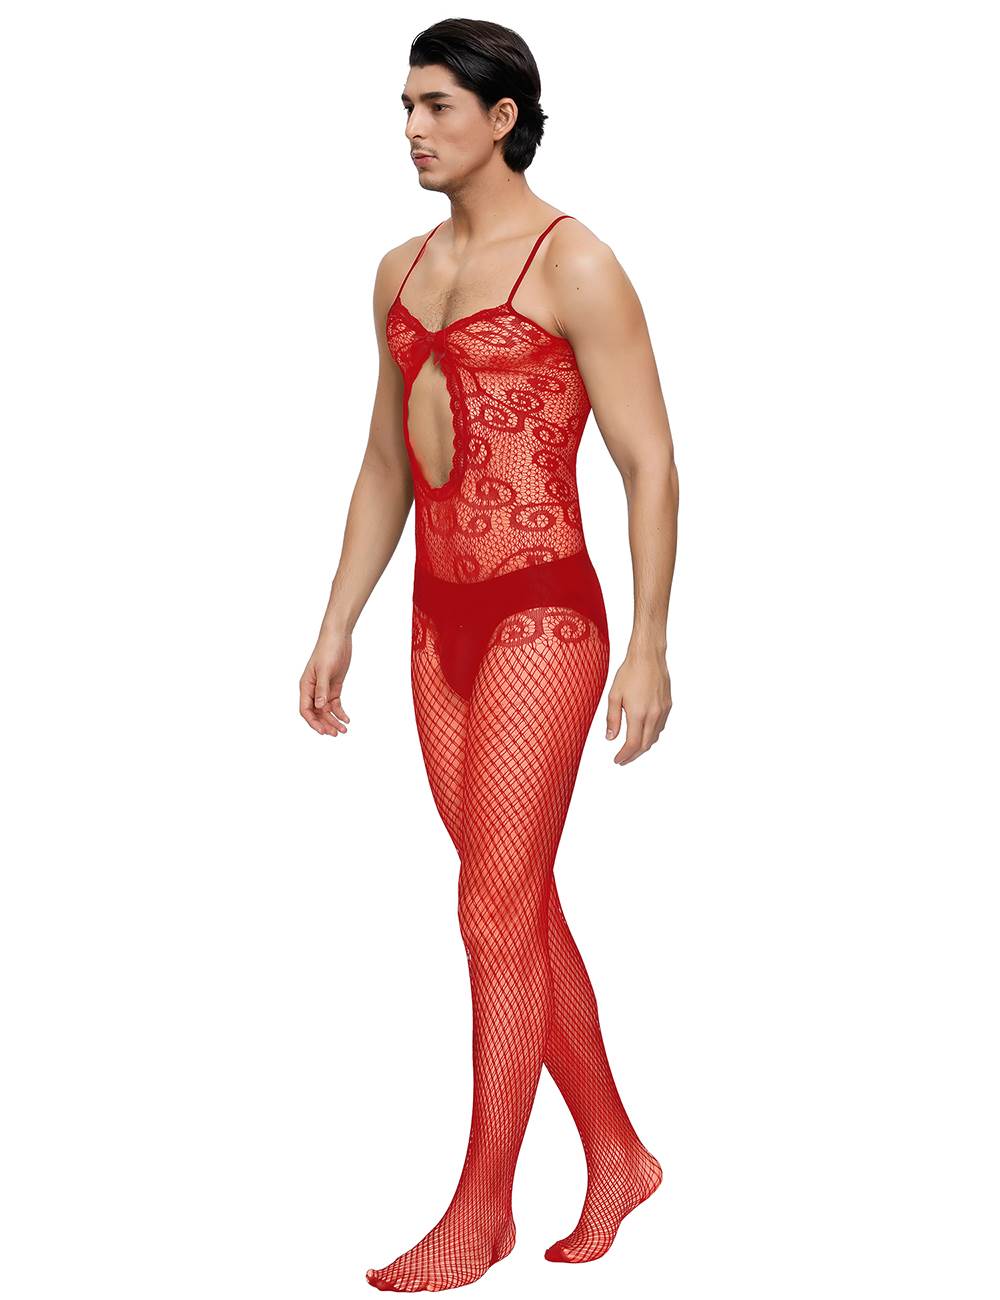 Scandals Swirl Cut Out Bodystocking